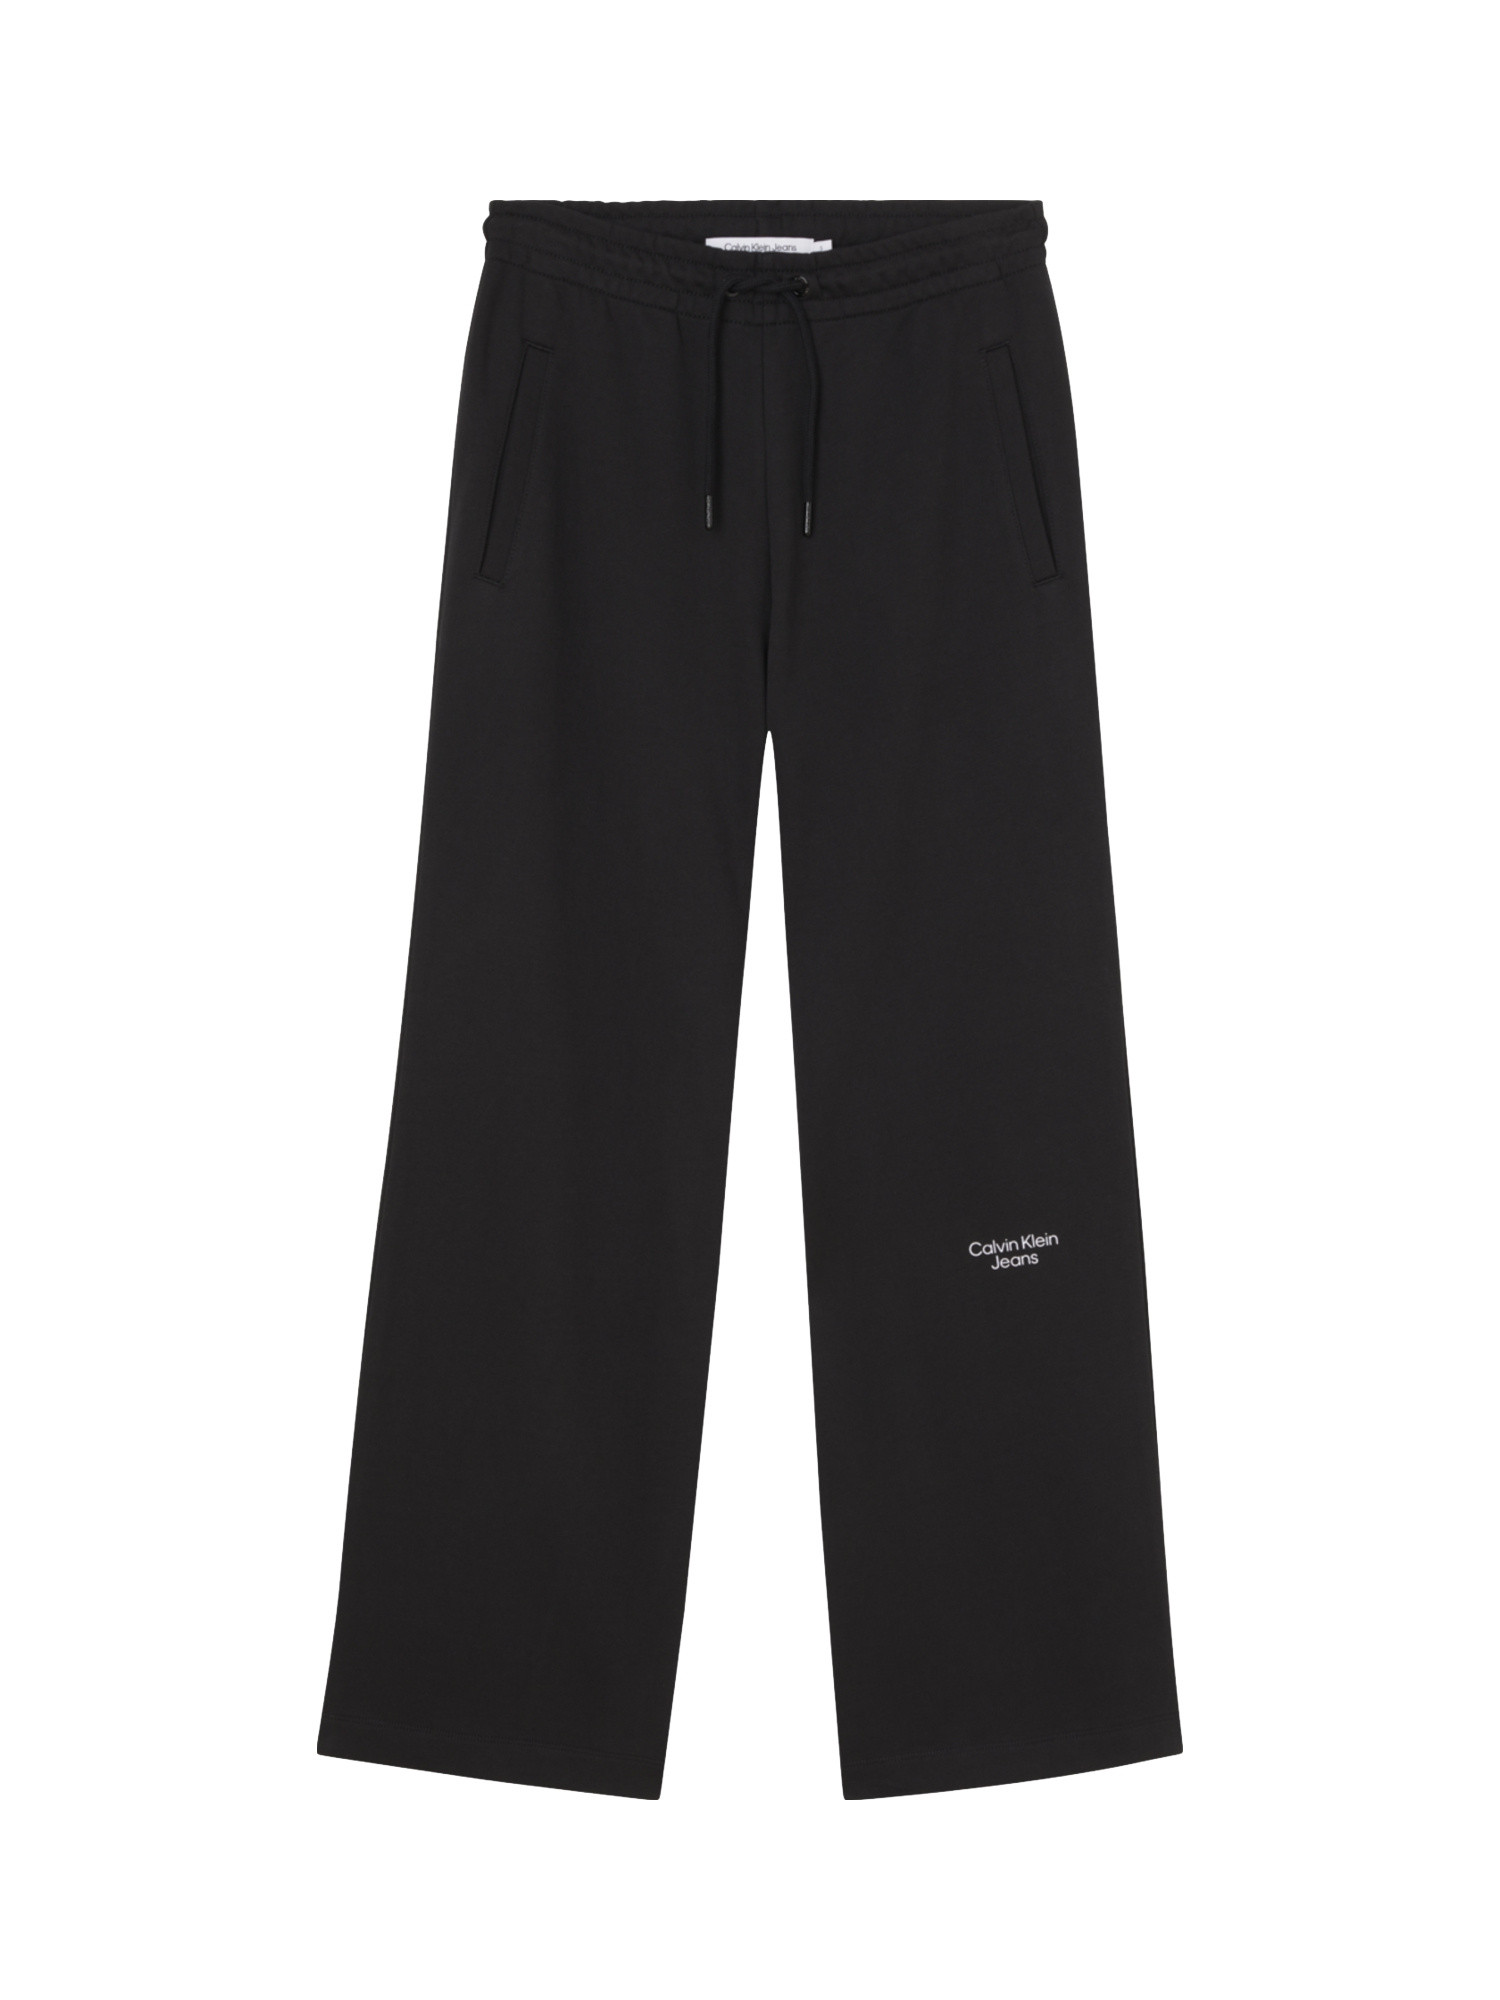 Wide leg trousers, Black, large image number 0